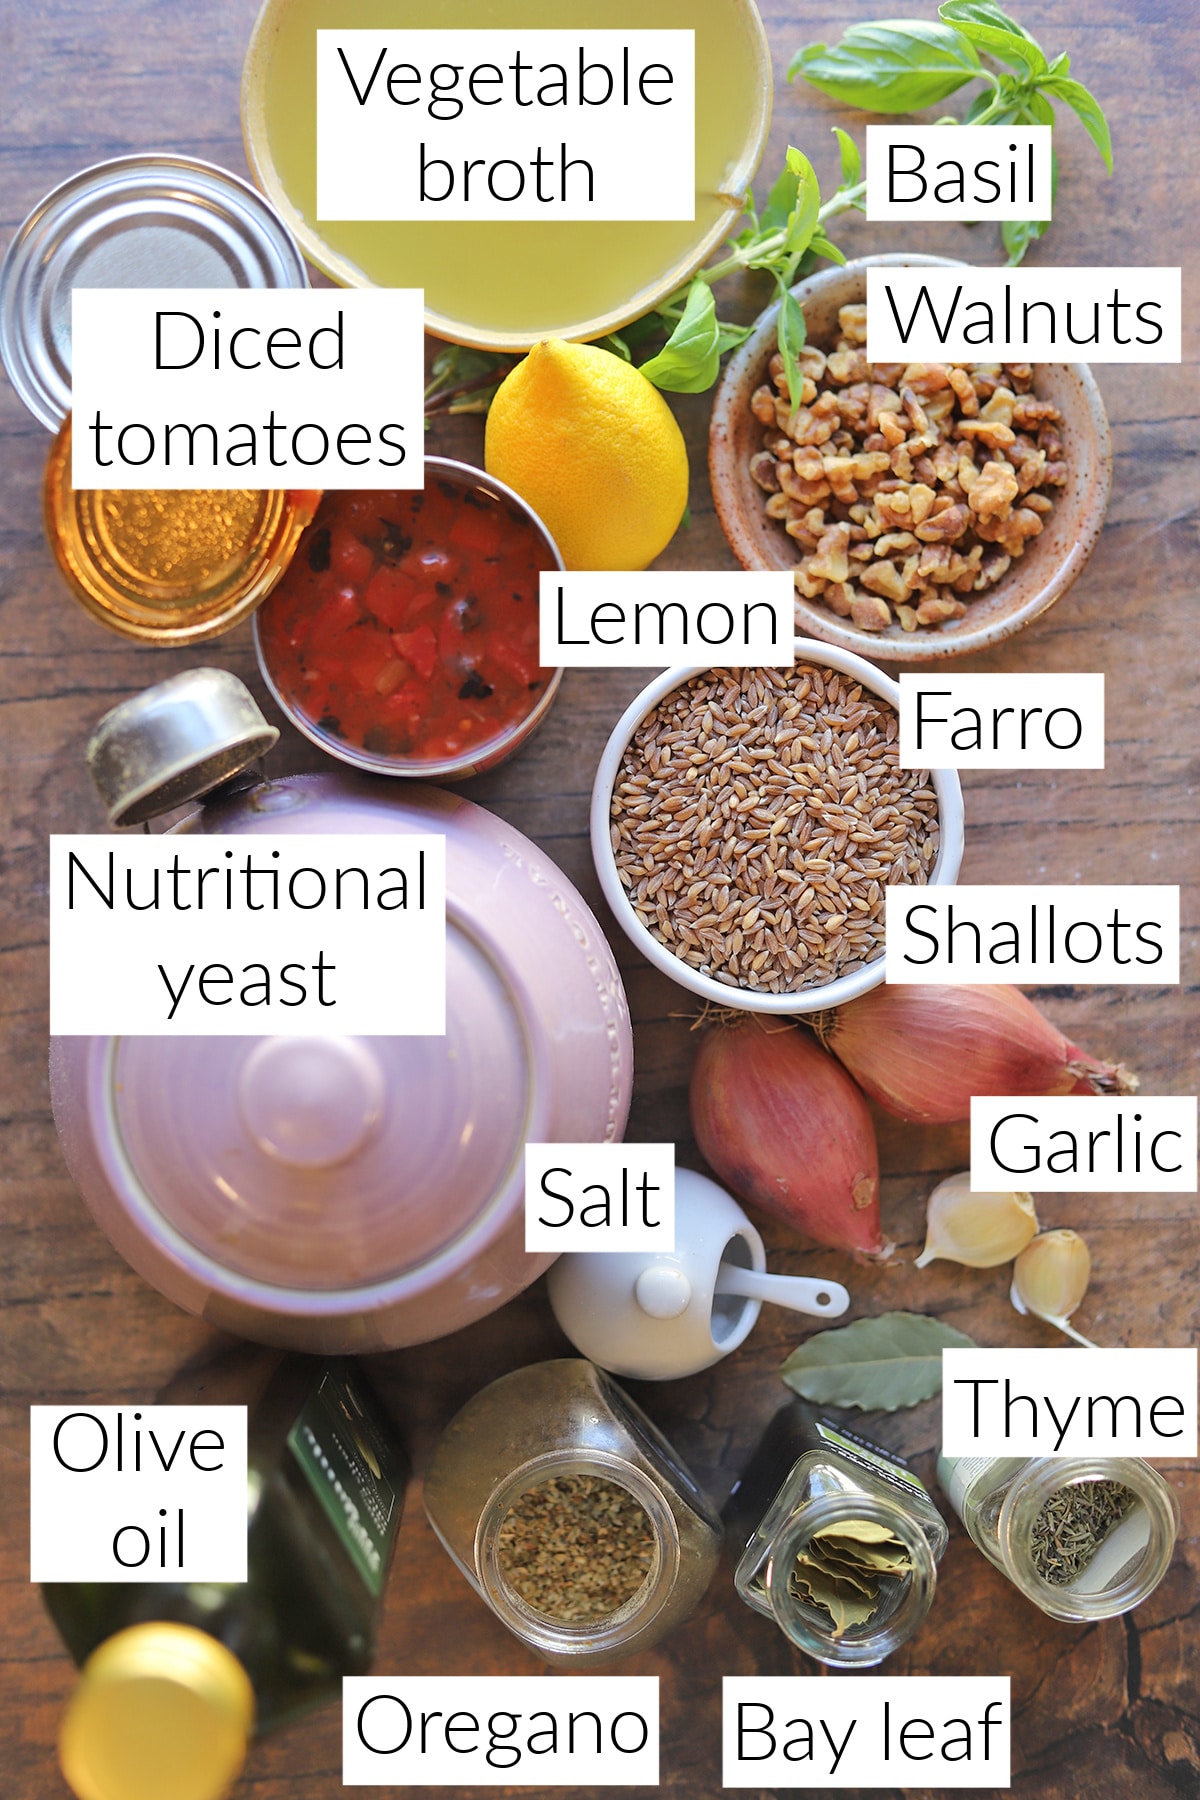 Labeled ingredients for baked farro recipe.